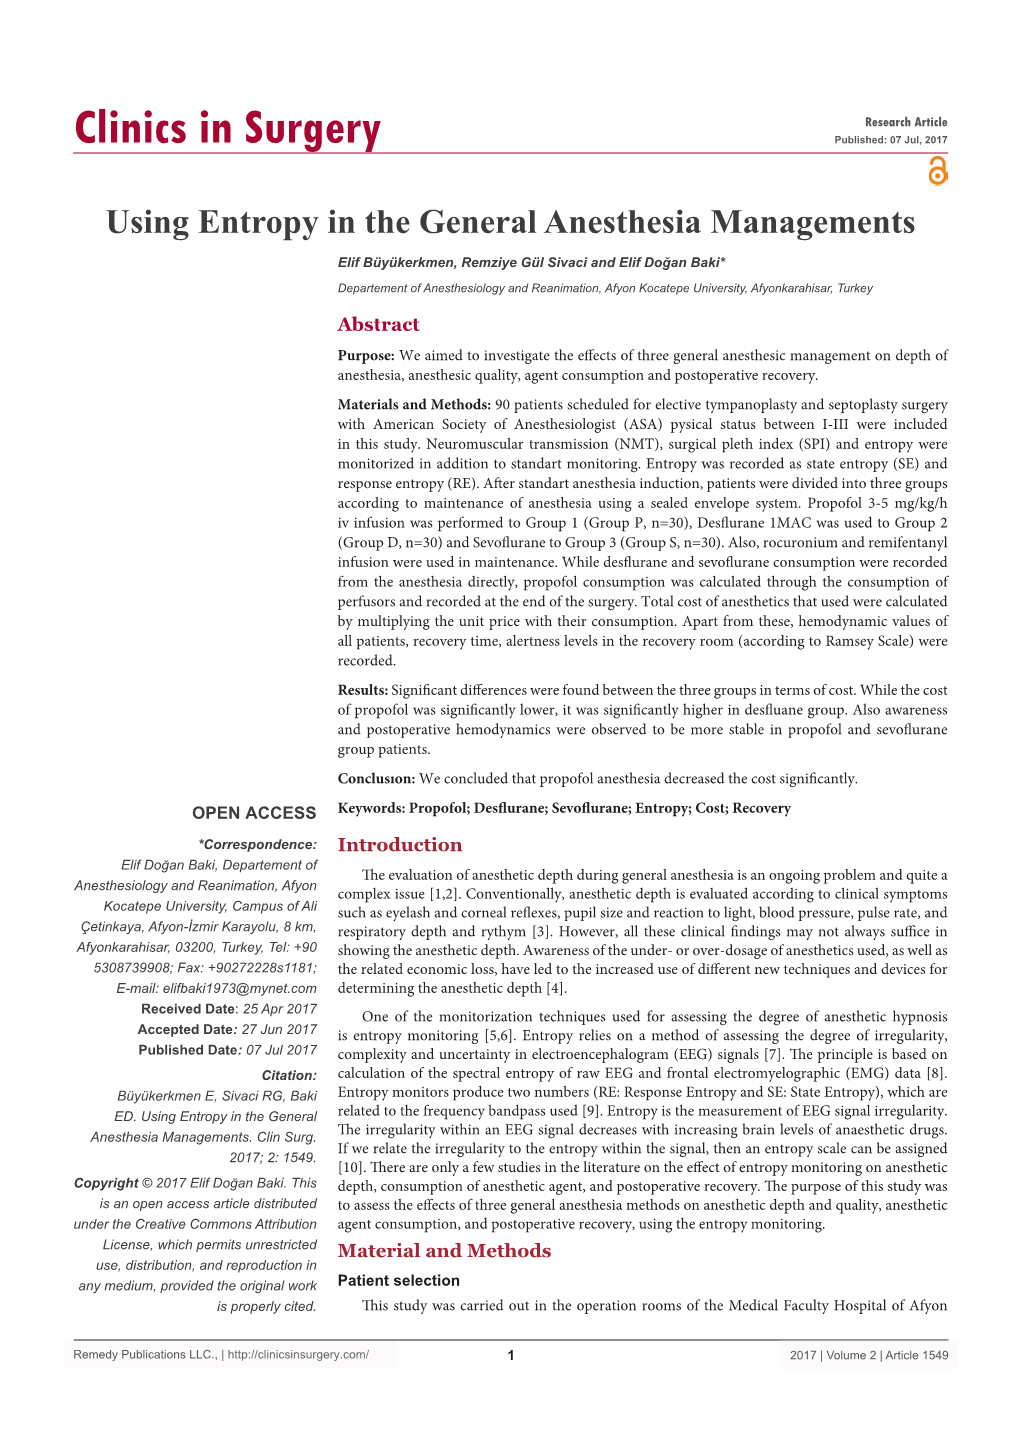 Using Entropy in the General Anesthesia Managements